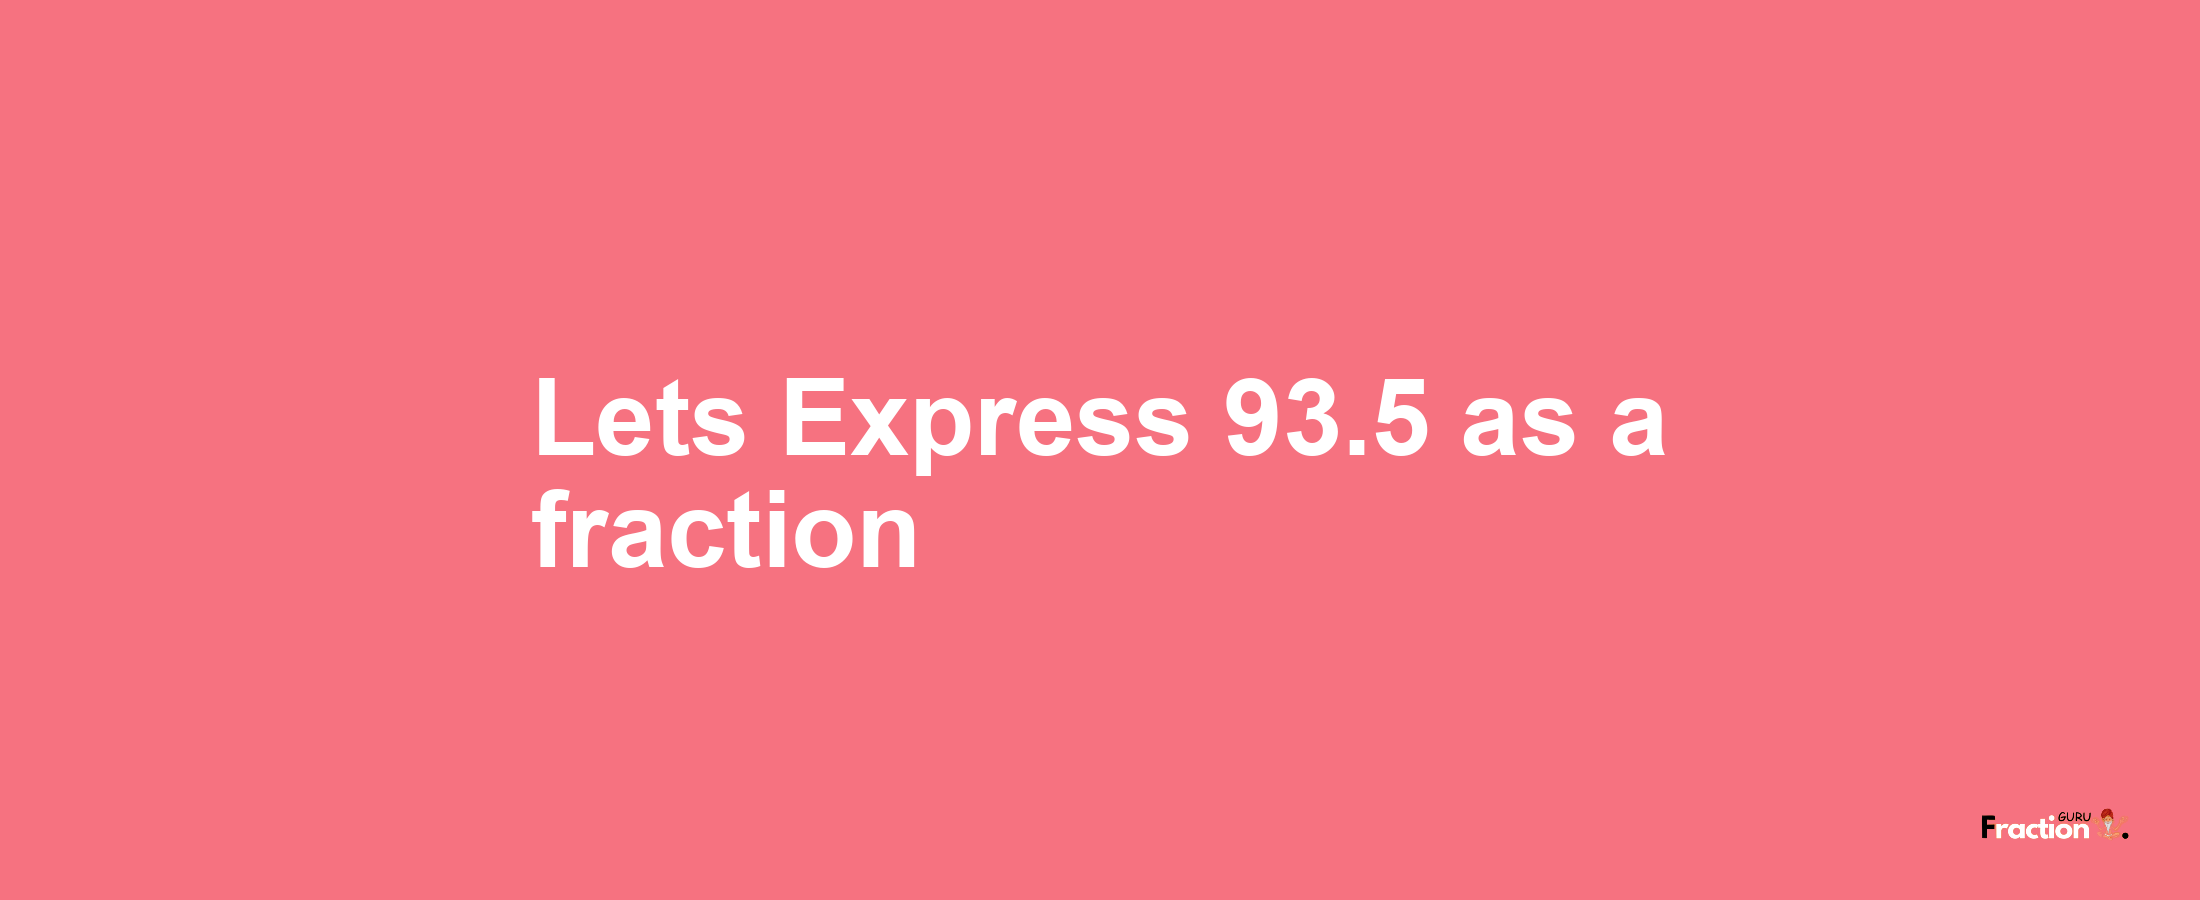 Lets Express 93.5 as afraction